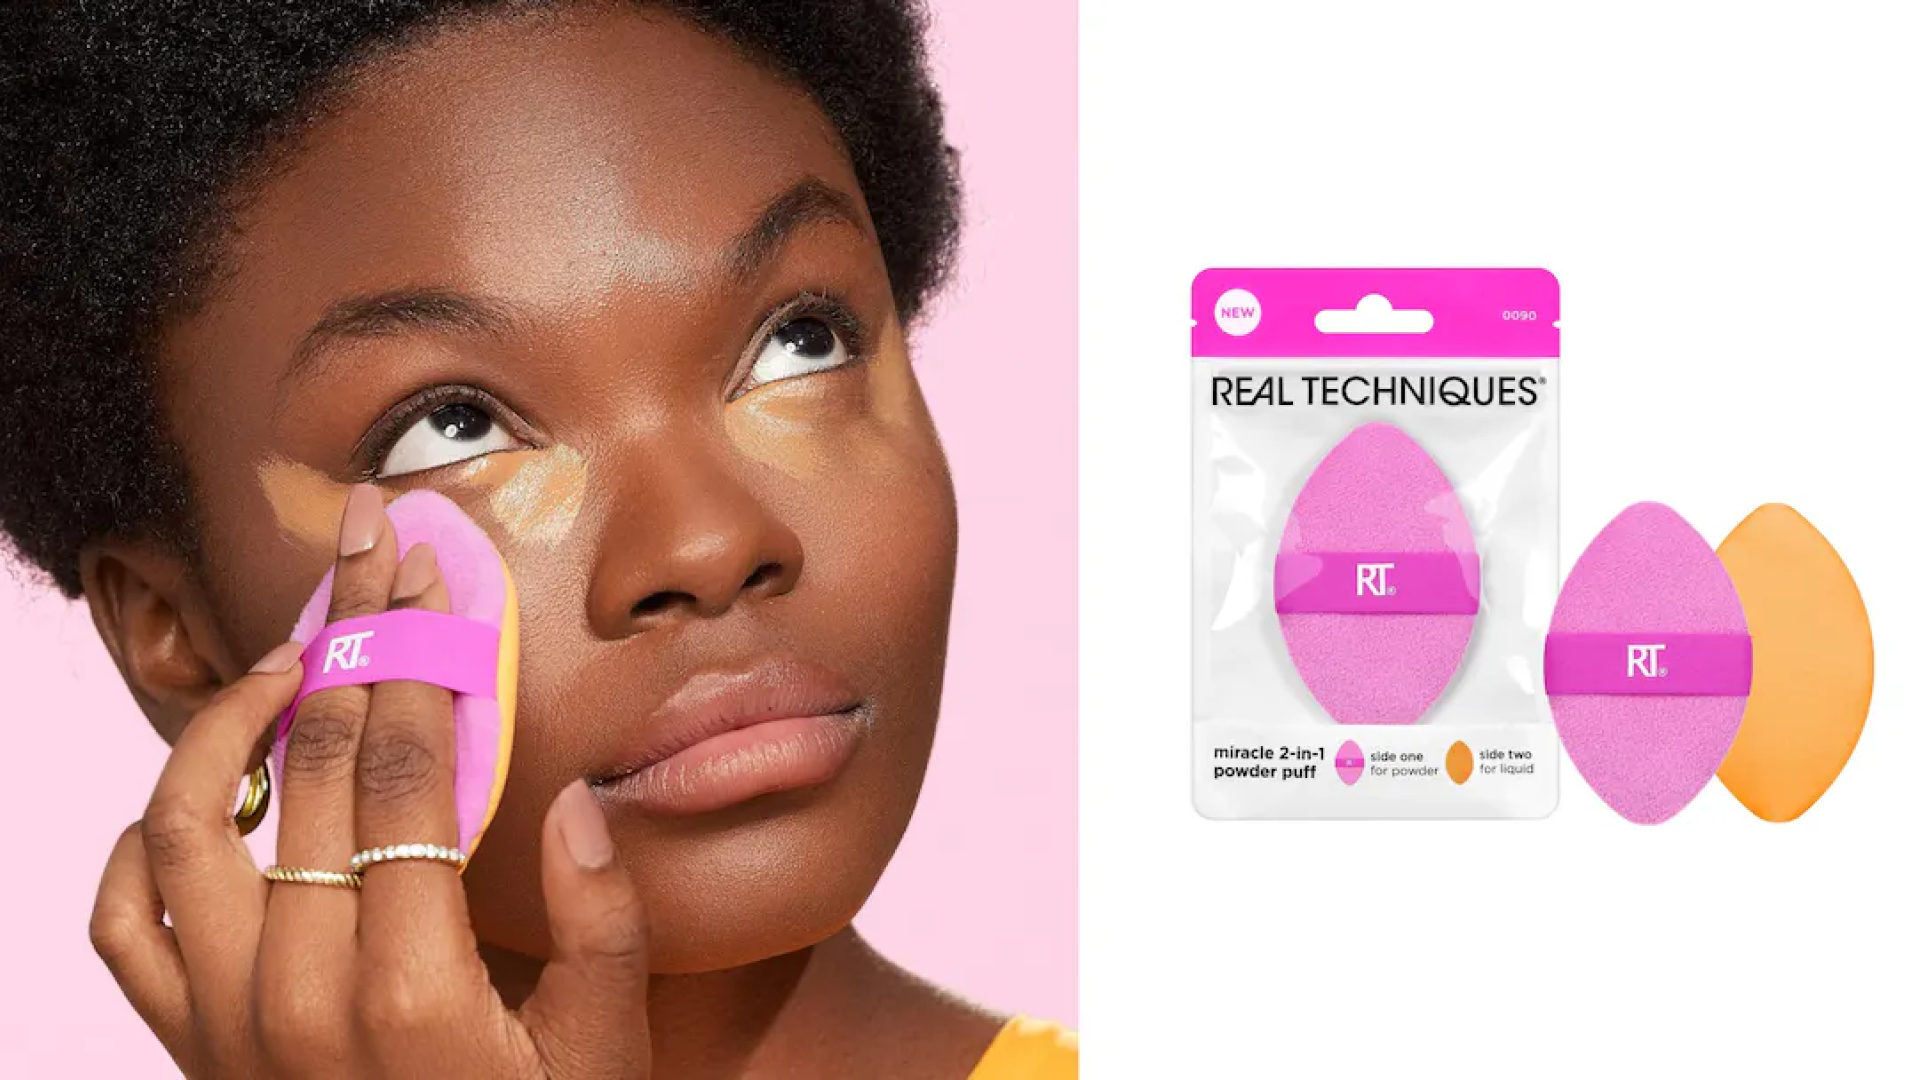 real techniques 2-in-1 powder puff